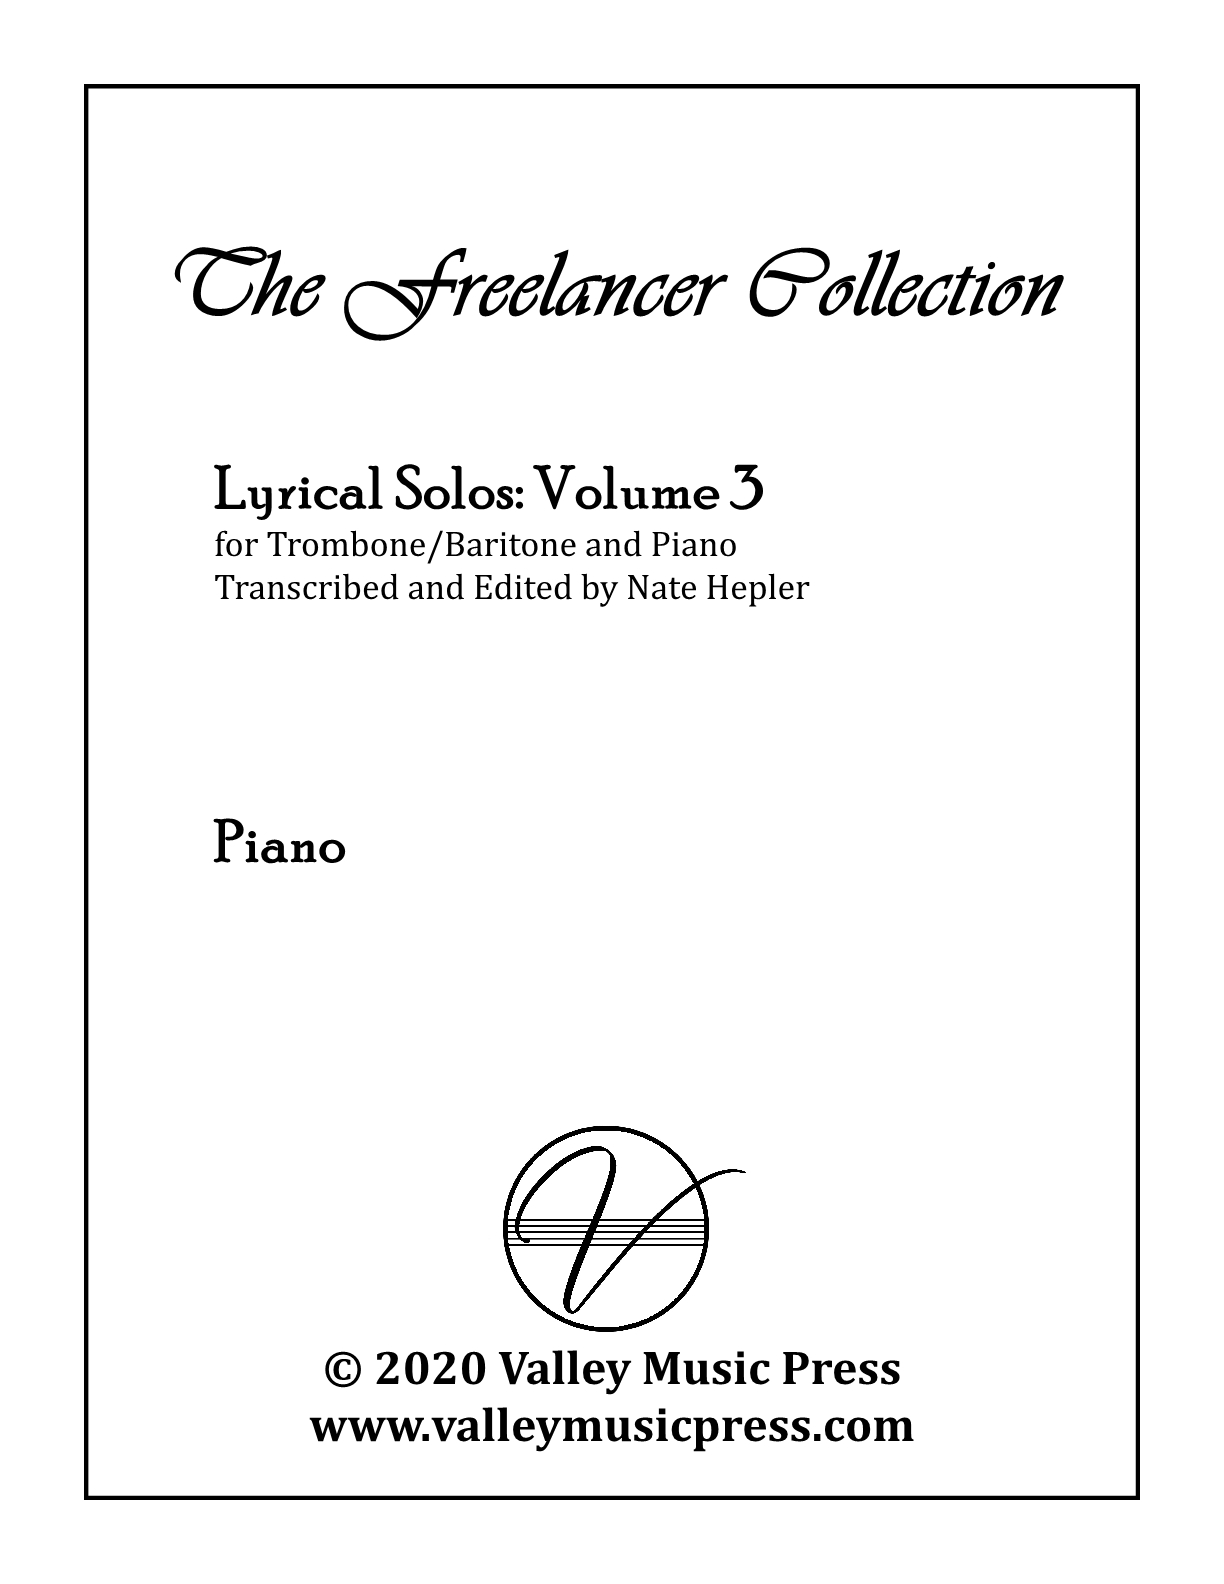 Hepler - Freelancer Collection Lyrical Solos Vol 3 (Trb & Piano) - Click Image to Close